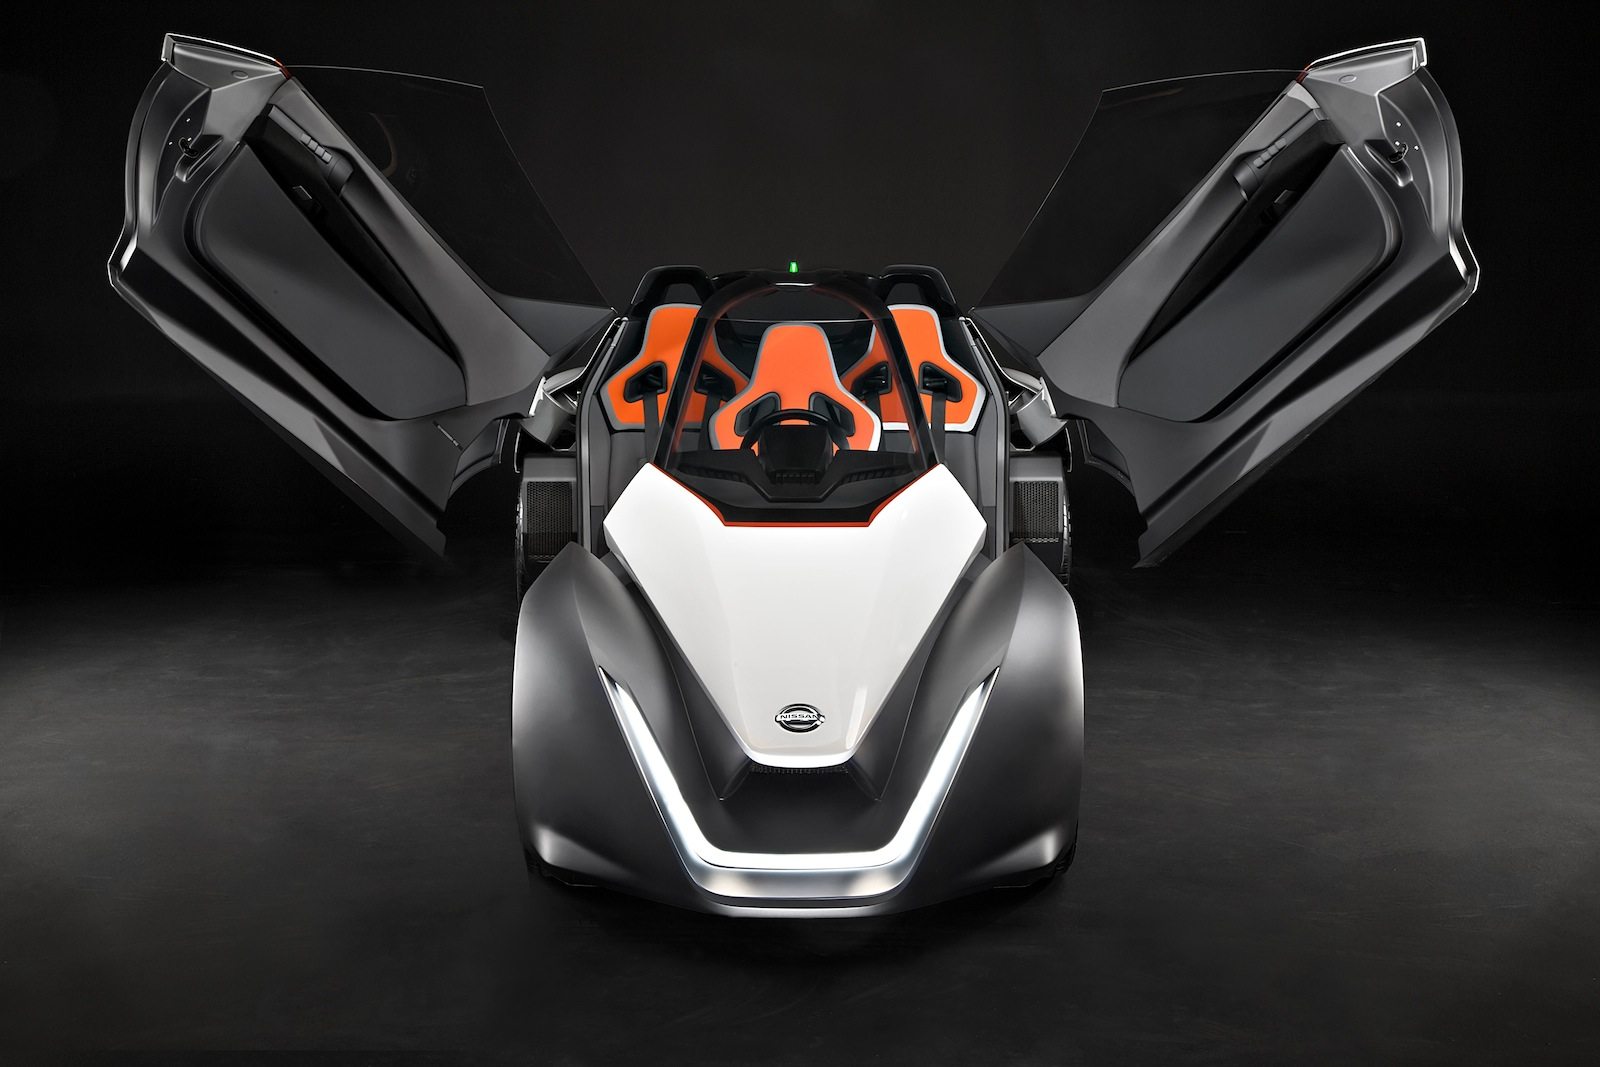 Nissan BladeGlider brings cutting edge Intelligent Mobility to l